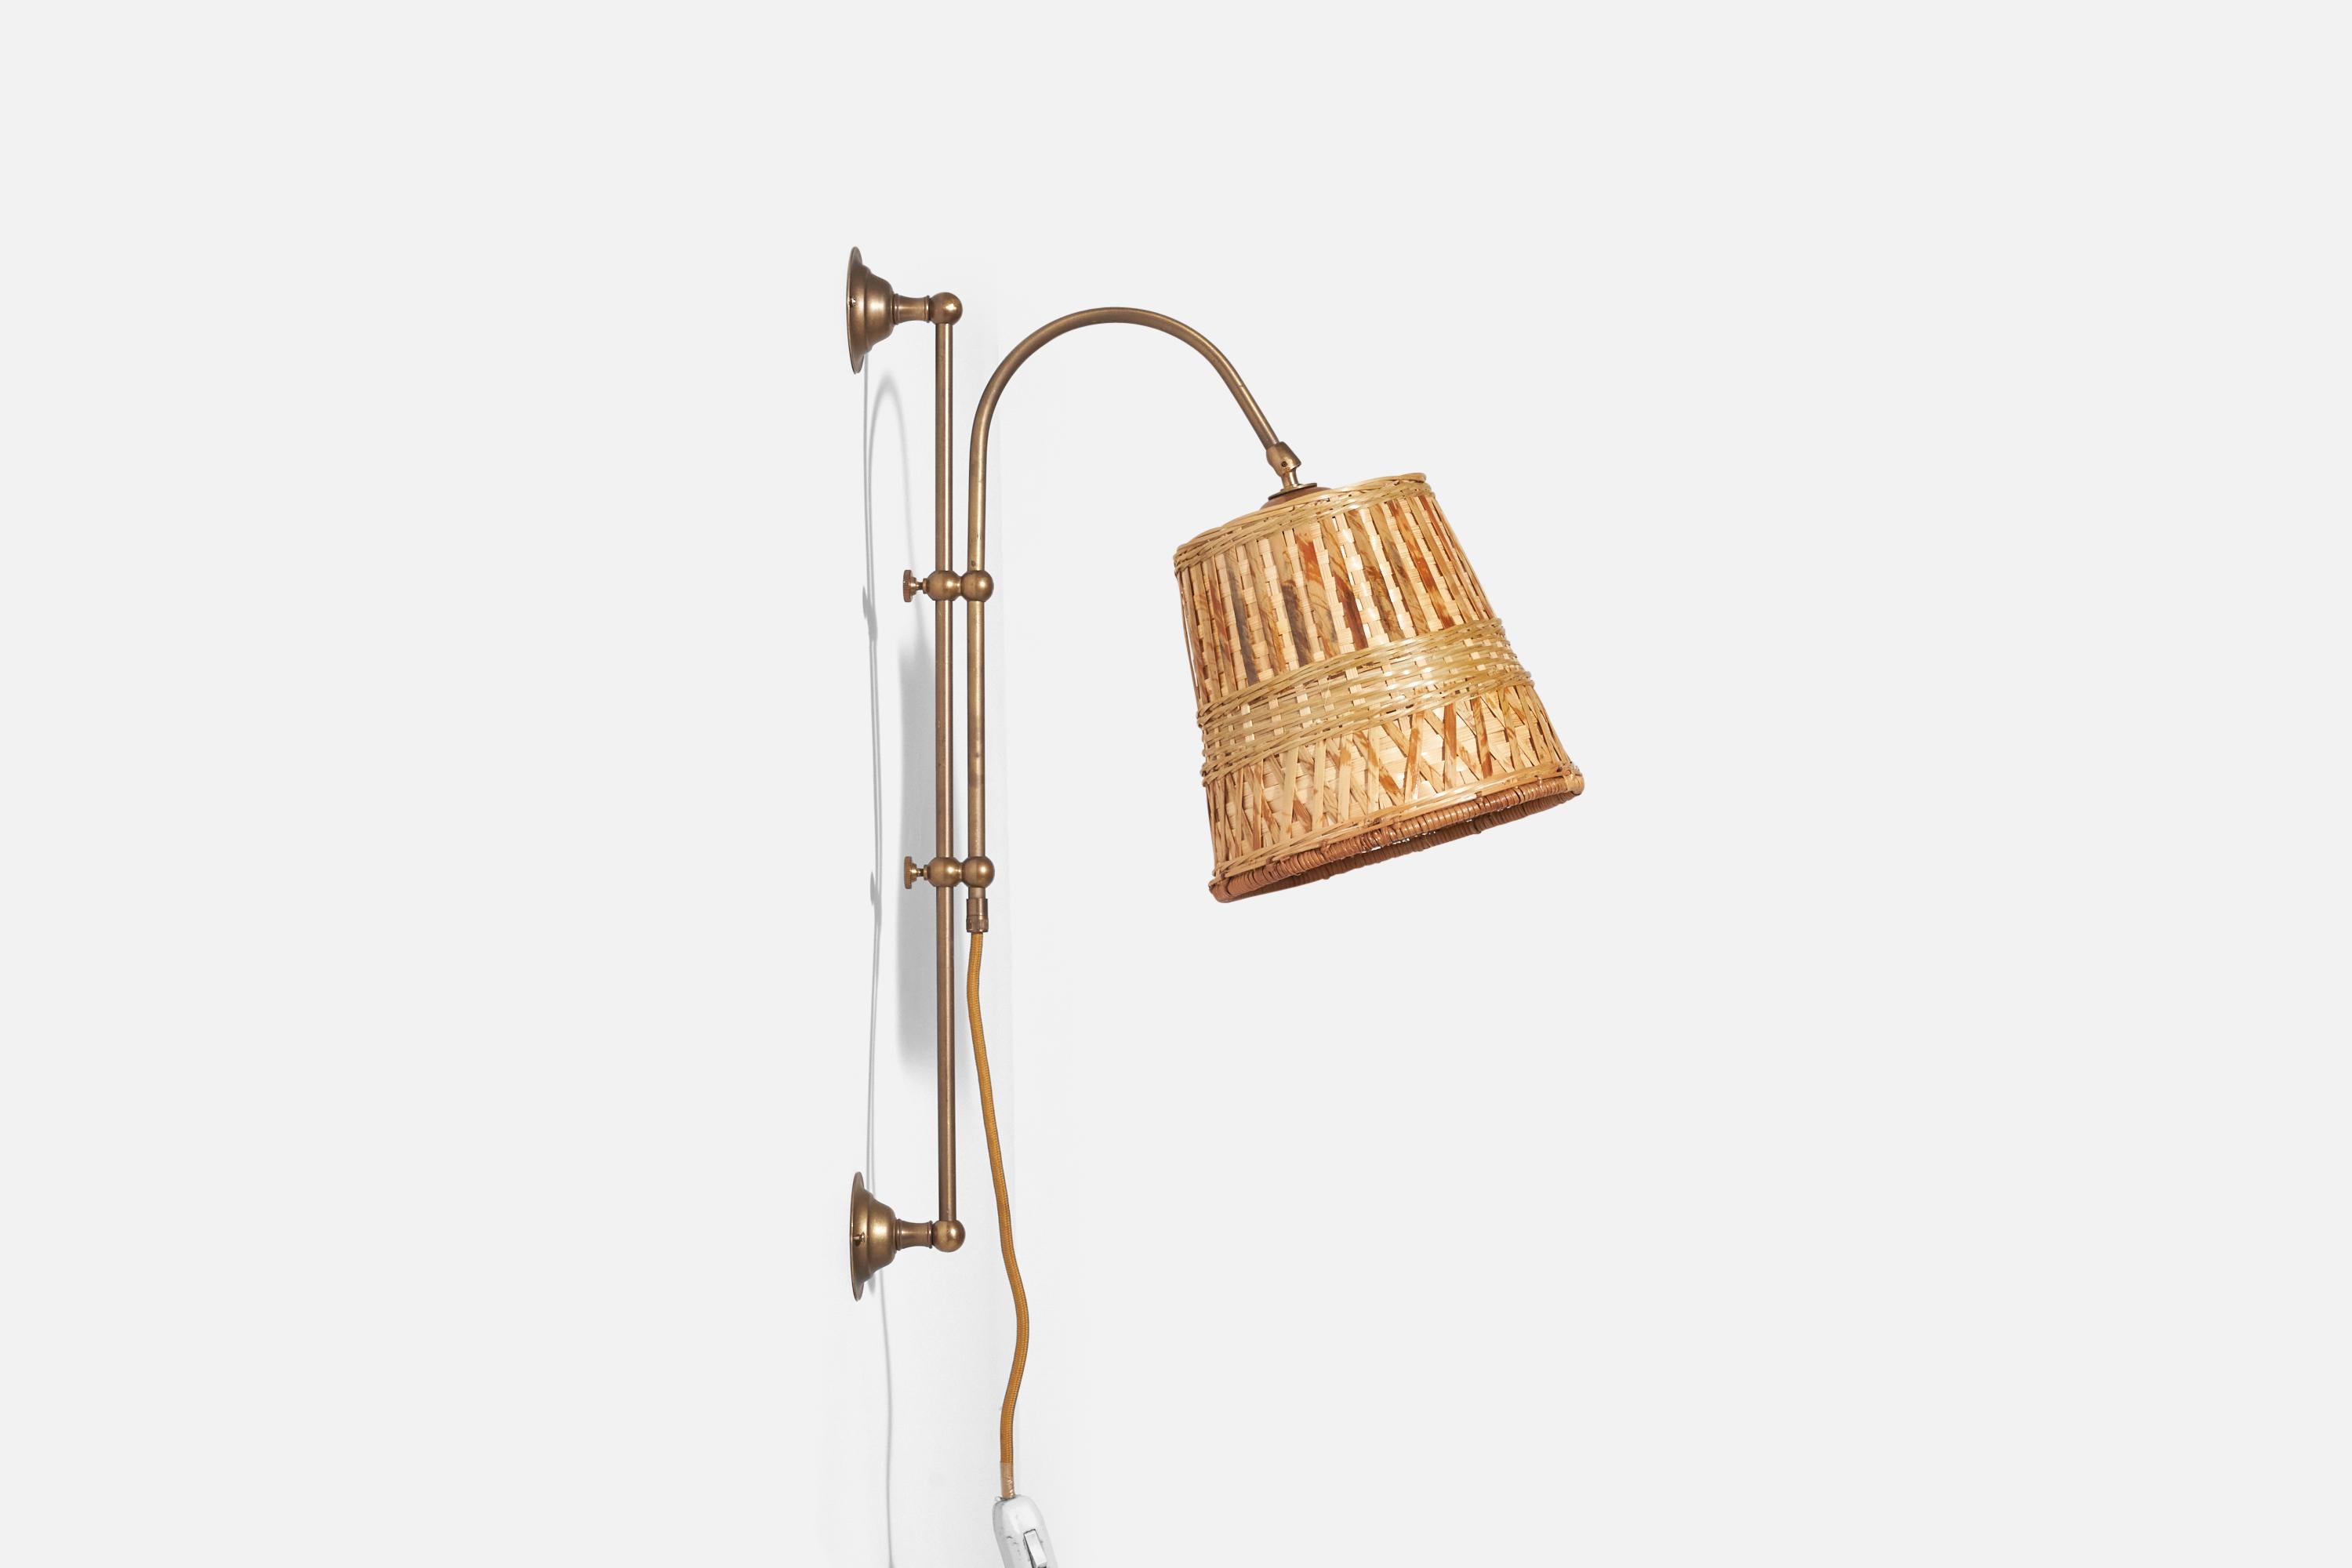 A brass and rattan sconce / wall light designed and produced in Sweden, 1960s.

Sold with Lampshade. Dimensions stated are of Sconce with Lampshade.

Dimensions variable, measured as illustrated in first image.

Dimensions of Back Plate (inches) :